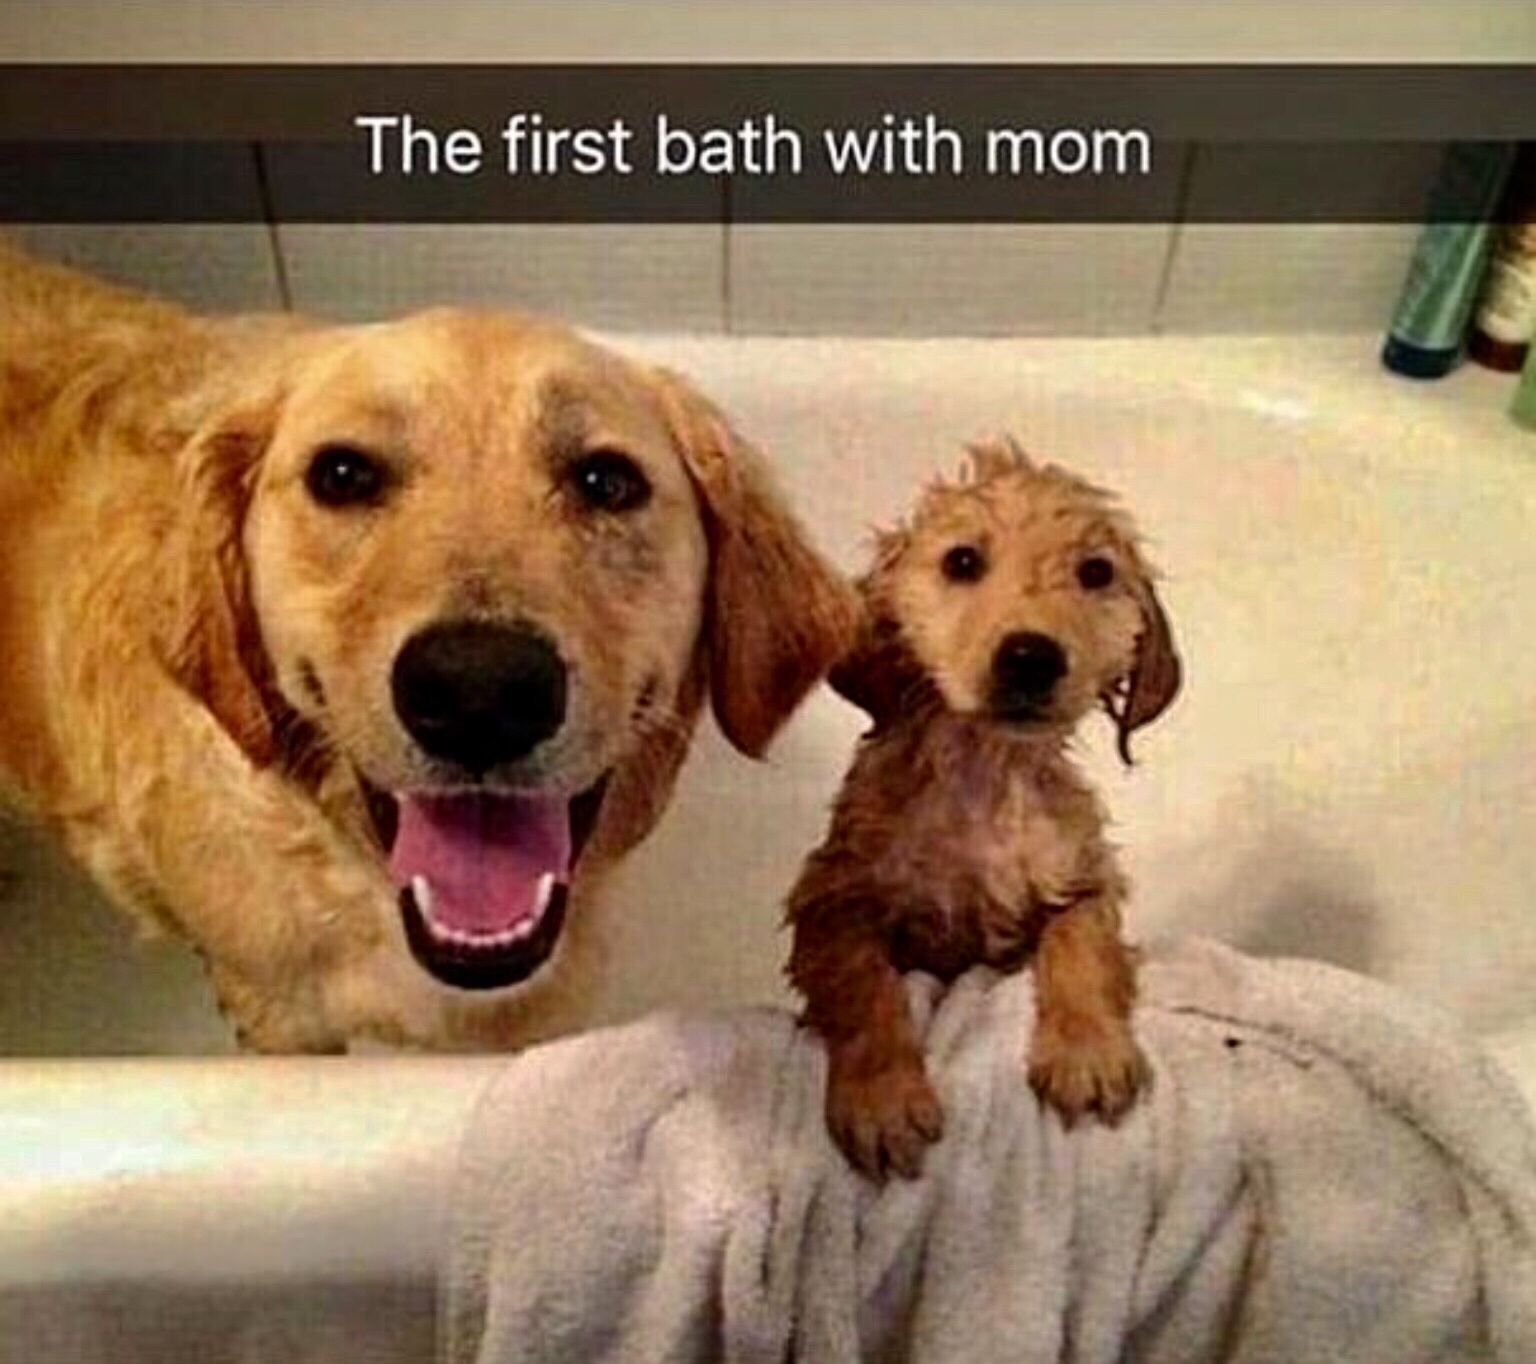 learn english for kids - The first bath with mom